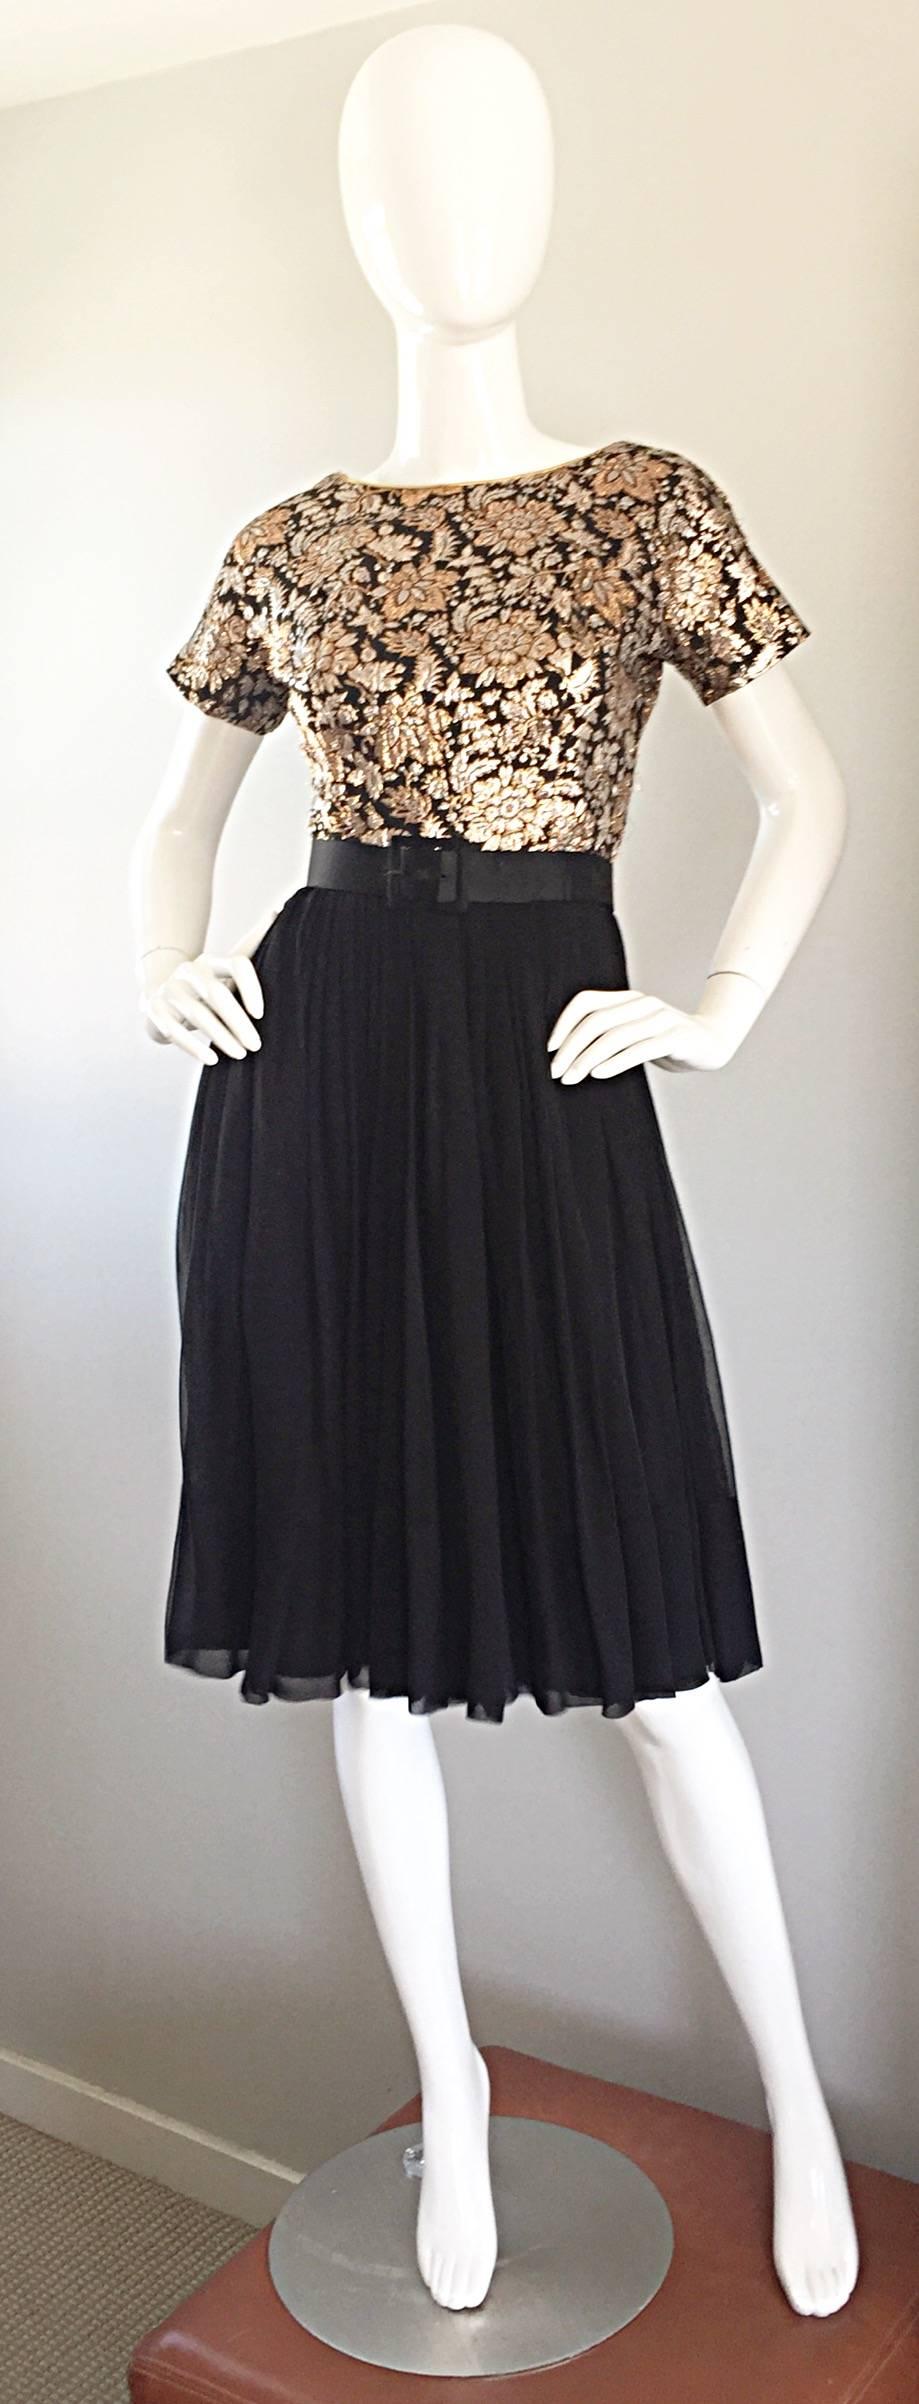 Exquisite 50s ELLIETTE LEWIS (Miss Elliette) metallic bronze, gold, silver and black silk brocade belted dress, with flowy black chiffon skirt! Chic flattering silhouette from the mid-late 1950s. Flirty full silk chiffon skirt, with layers and